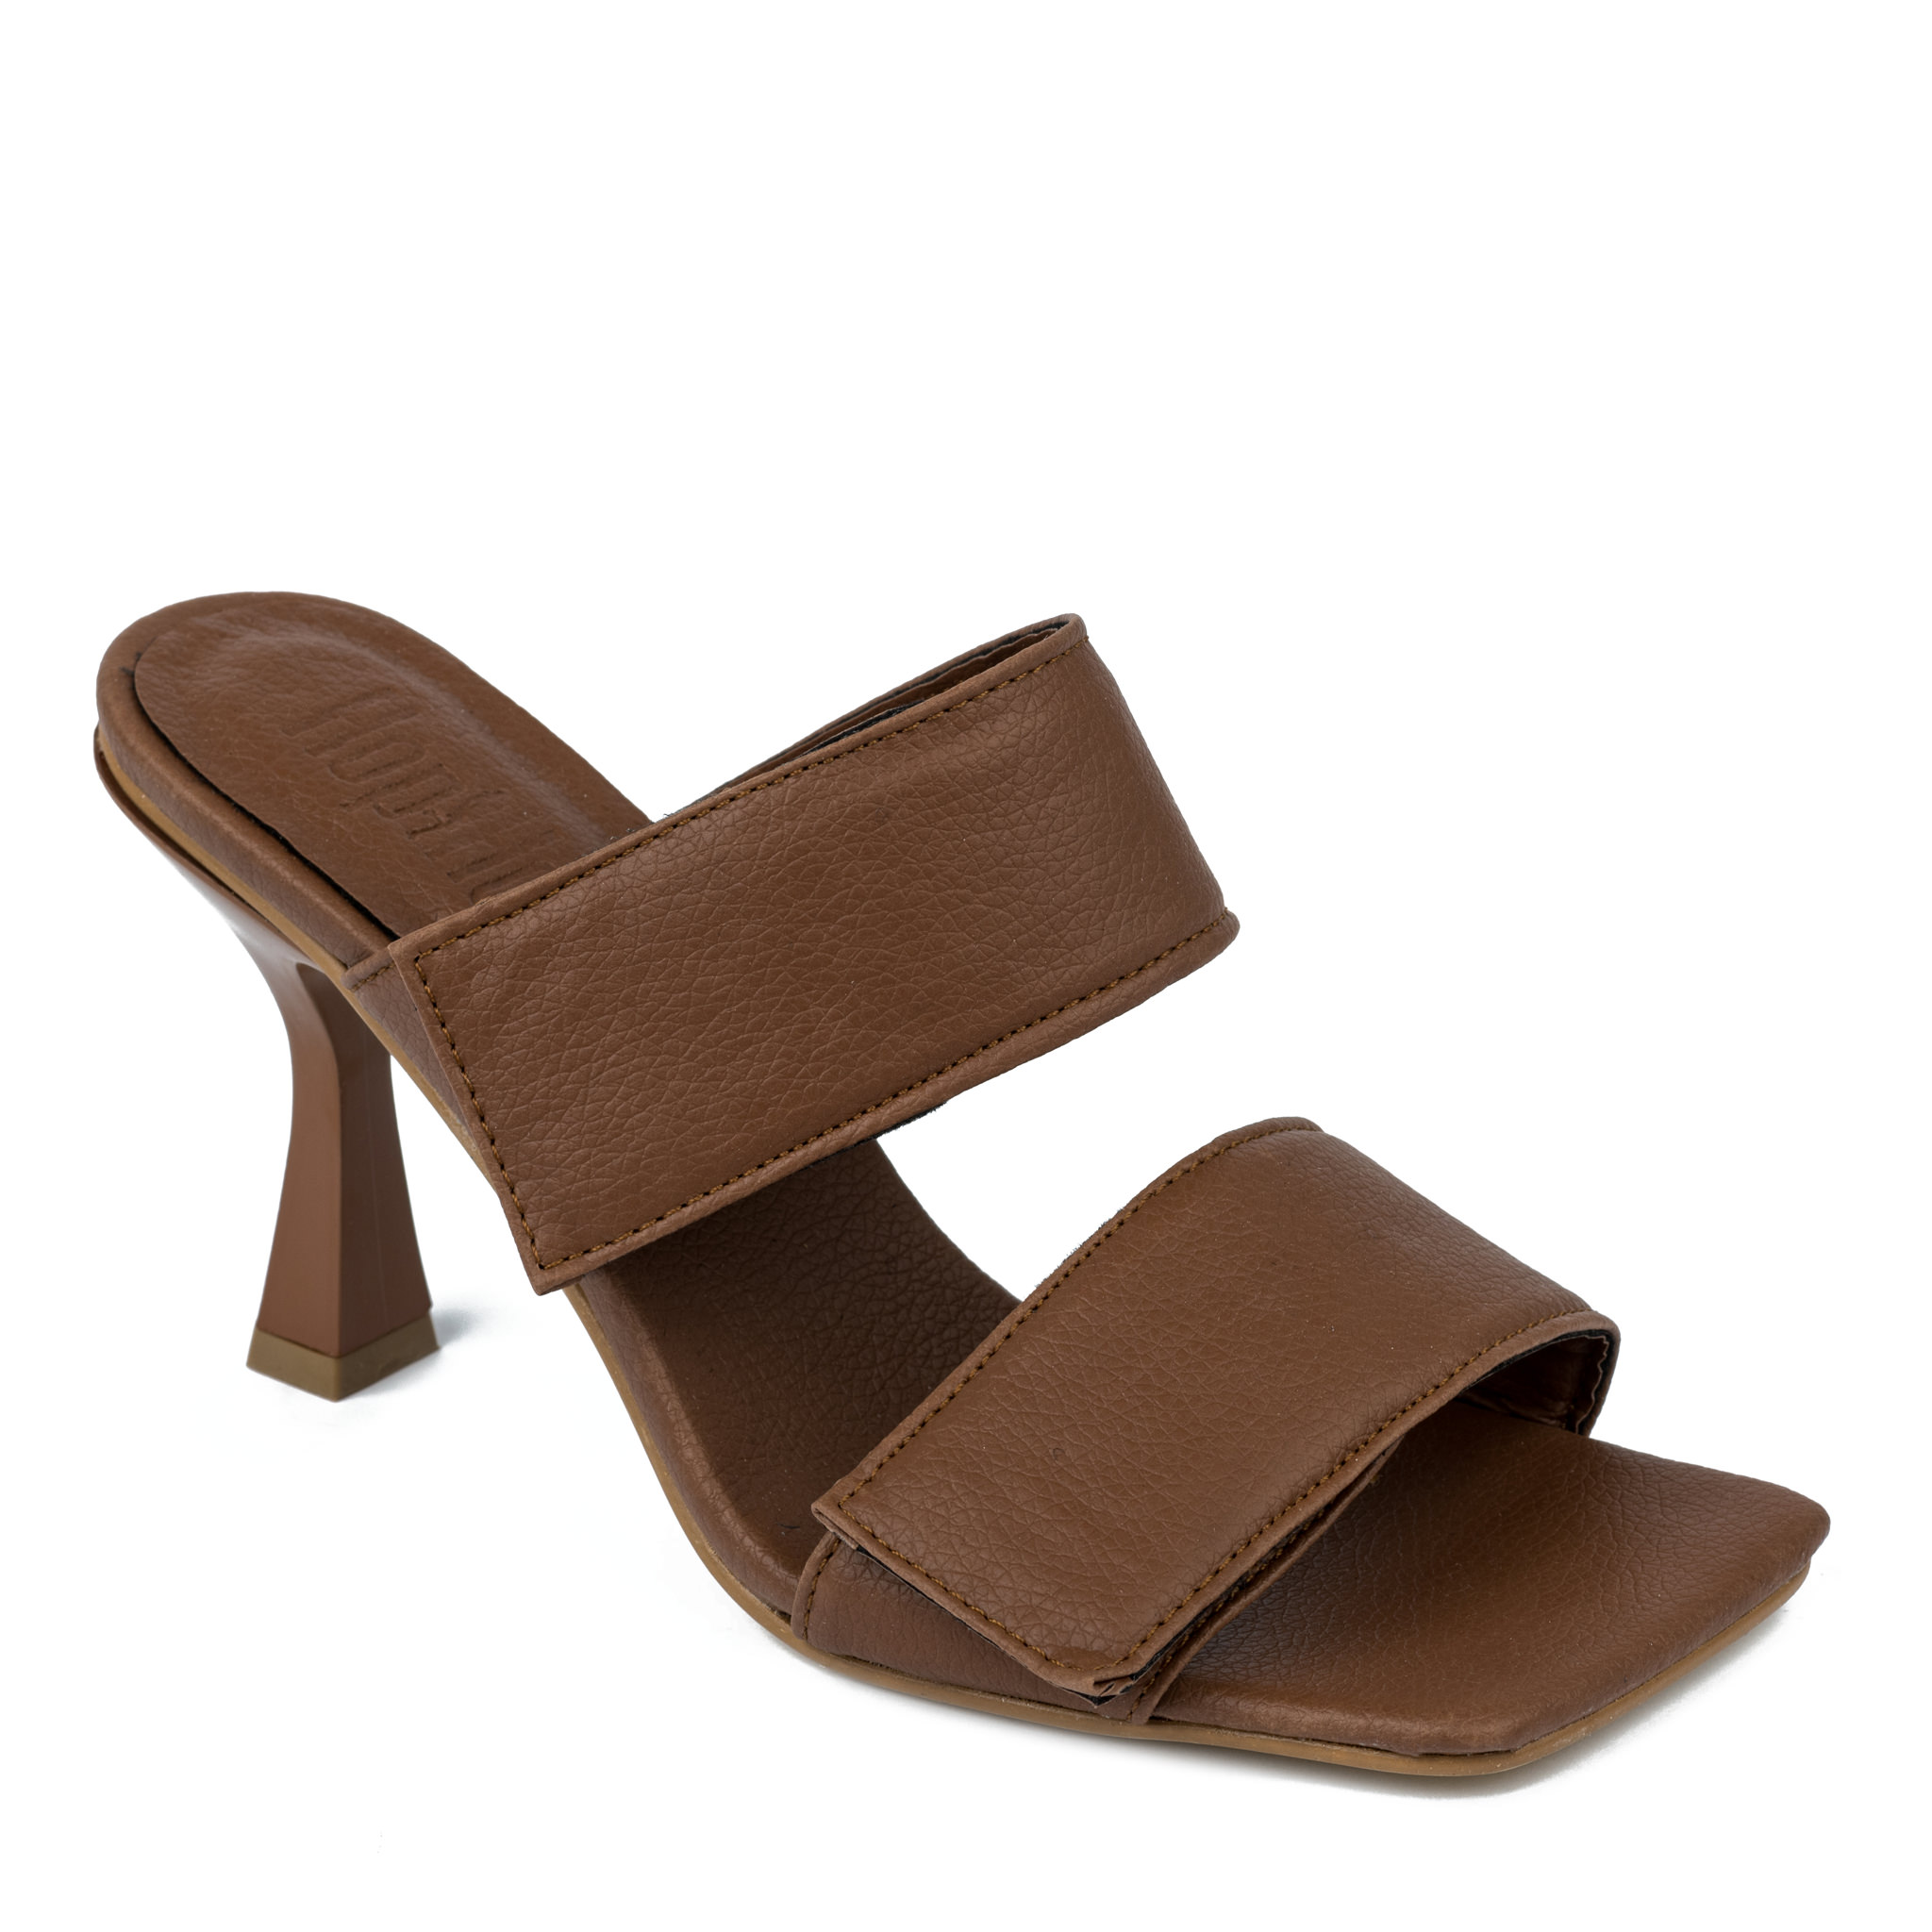 VELCRO BAND MULES WITH BLOCK HEEL - CAMEL